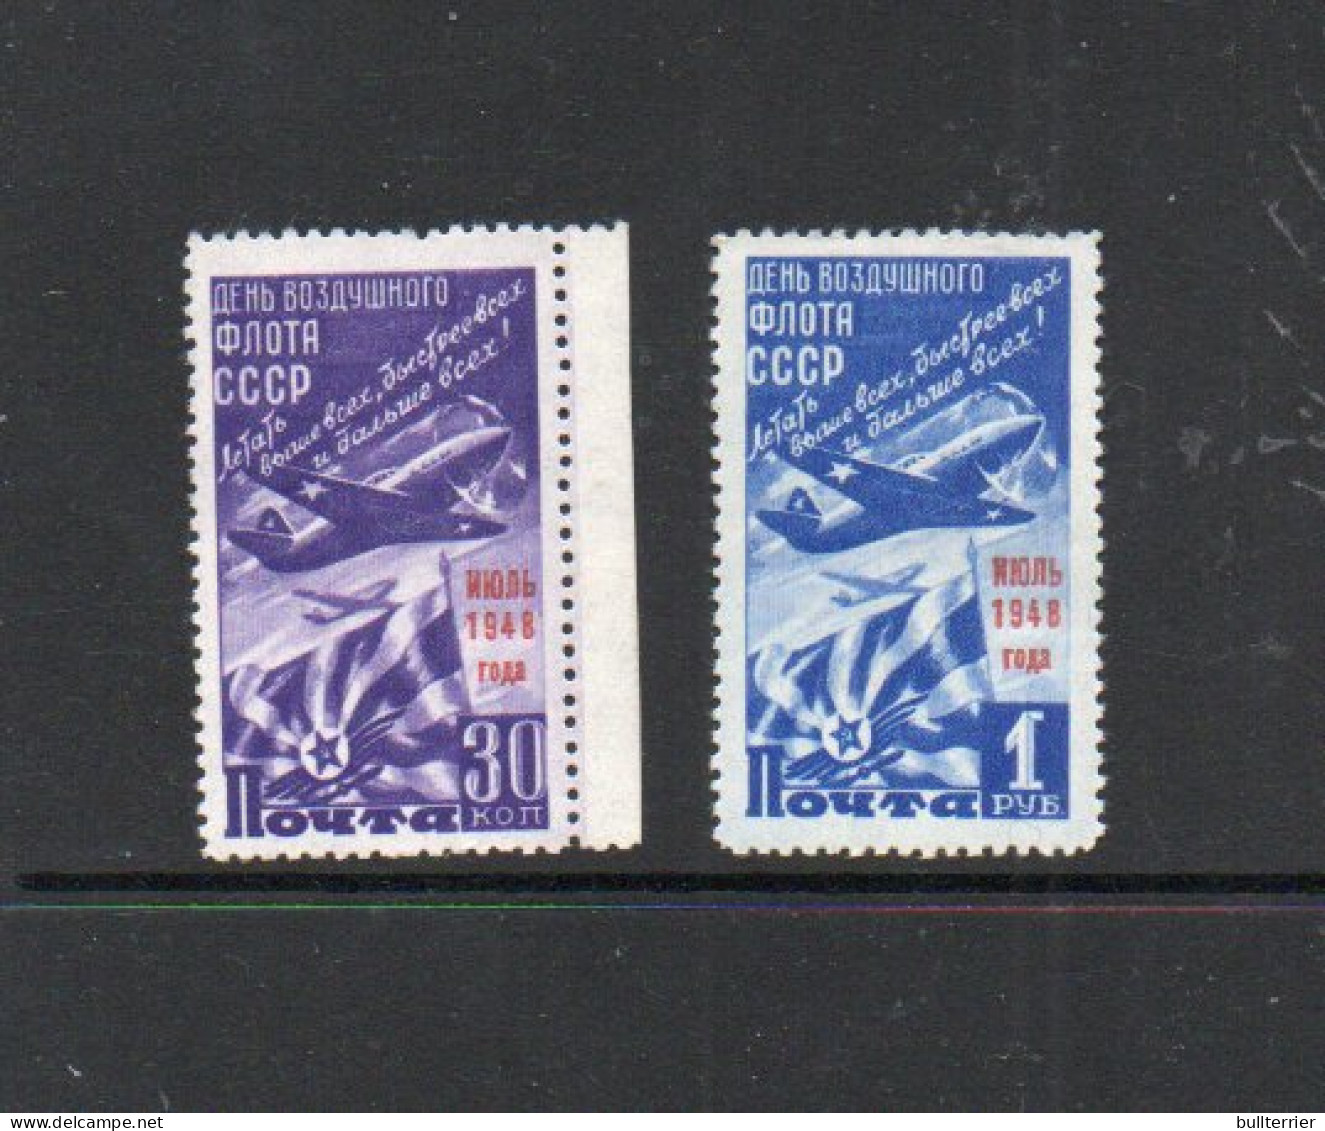 RUSSIA / USSR - 1948 - AIR FORCE DAY OVERPRINTS SET OF 2 MINT NEVER HINGED ,SG CAT £17.75 - Unused Stamps